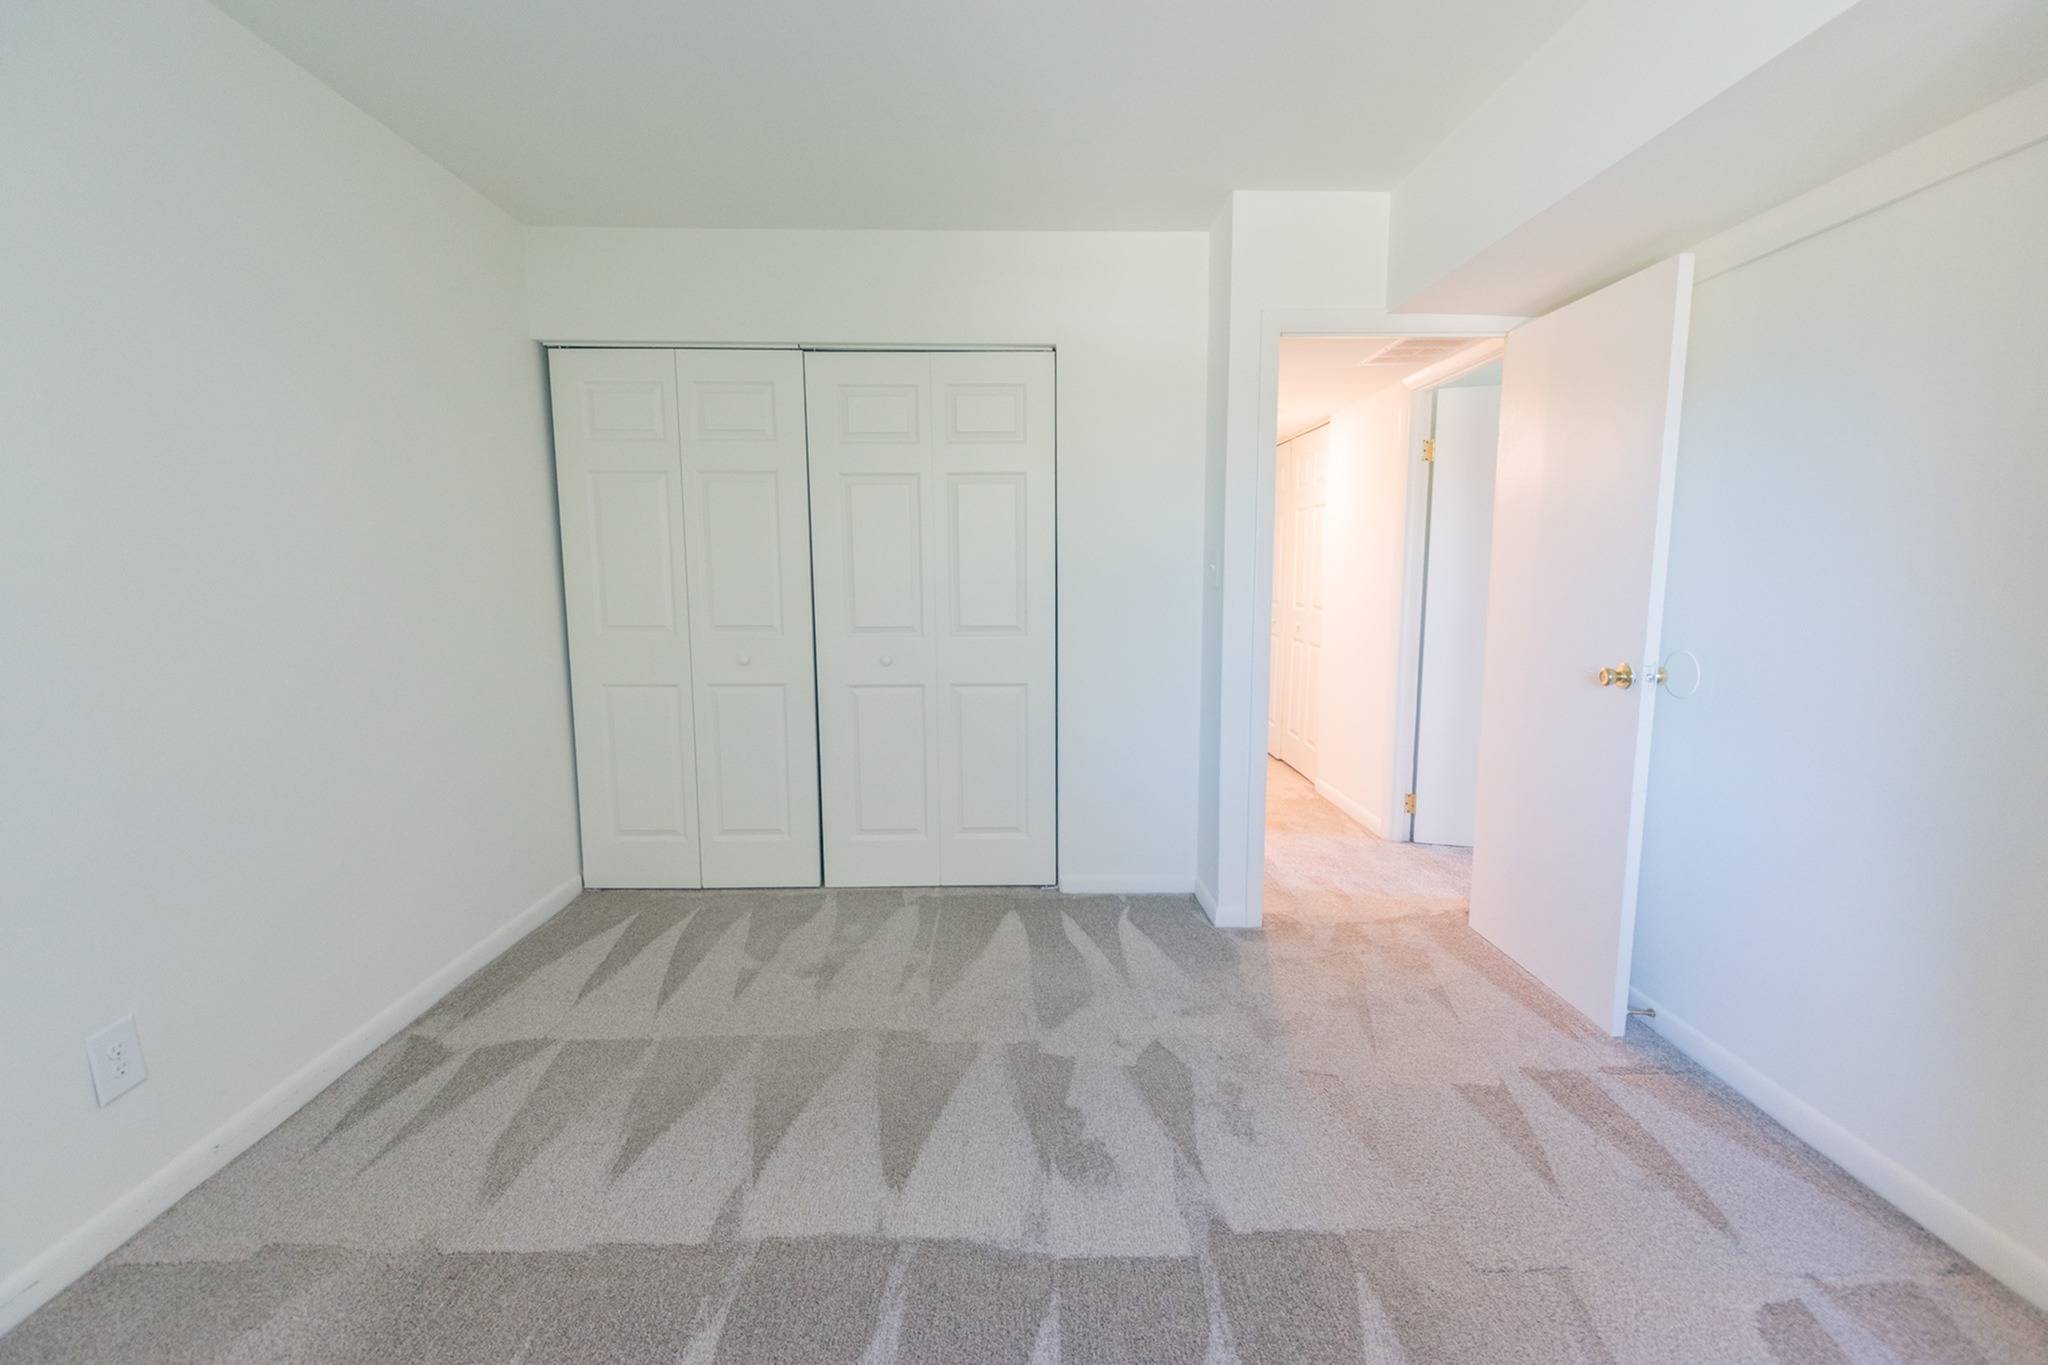 Bedroom area of an apartment unfurnished, fitted with carpet flooring, and a spacious closet space